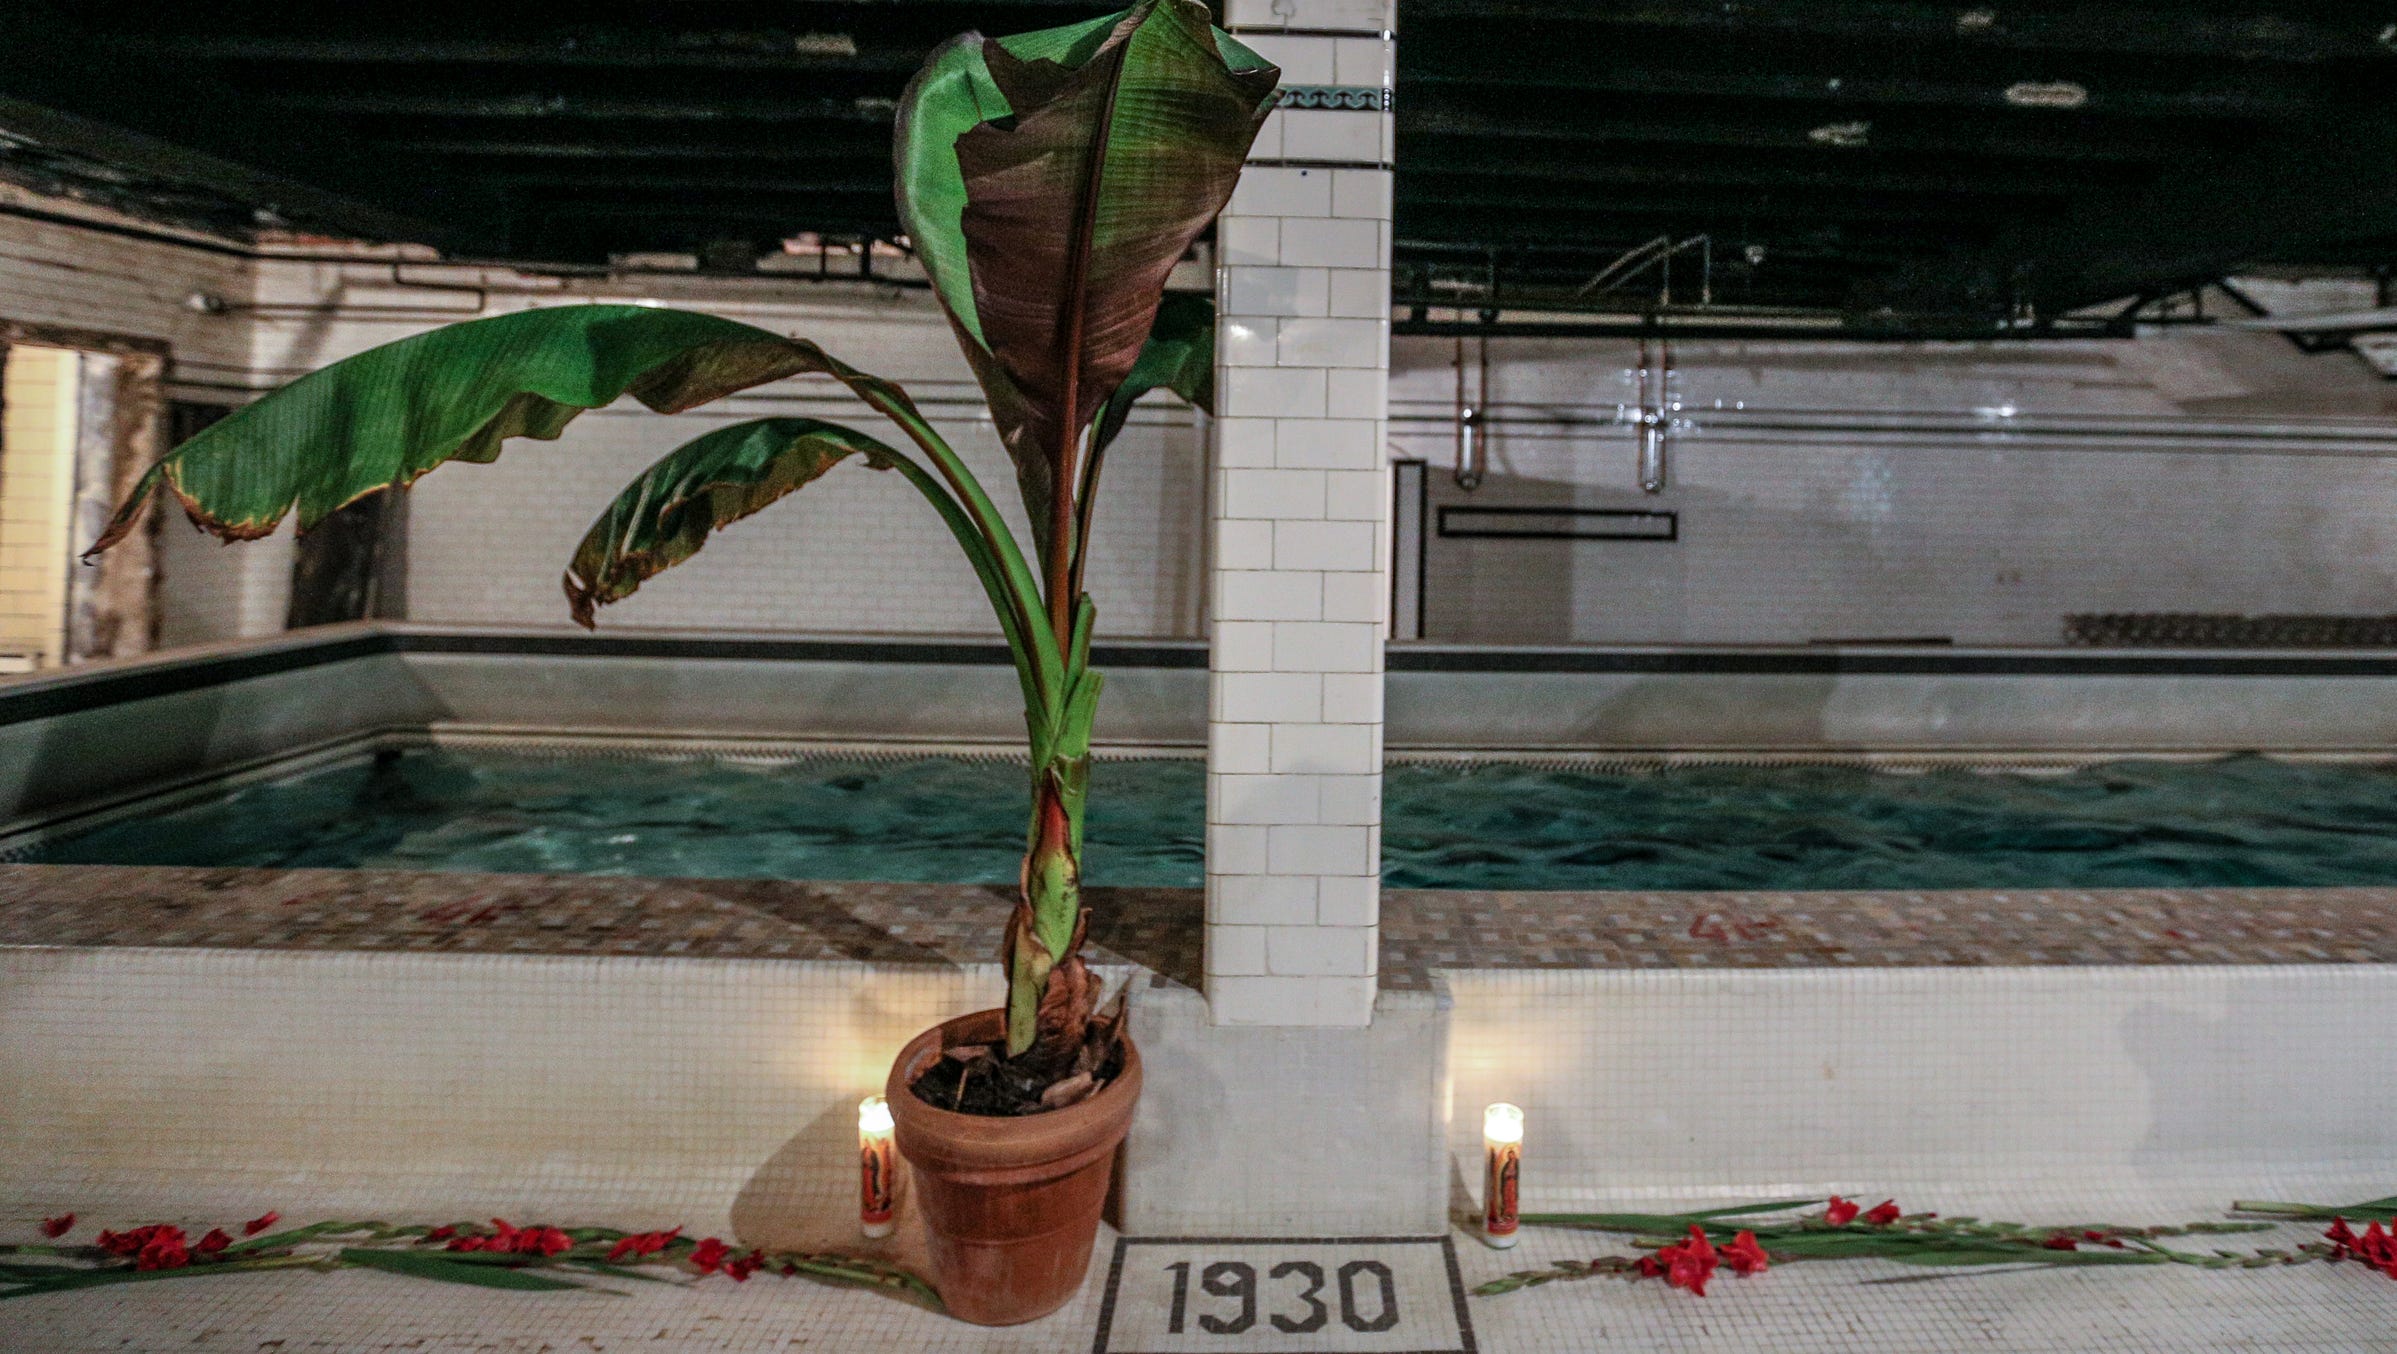 The Schvitz: Detroit bathhouse with steamy past ready to reopen